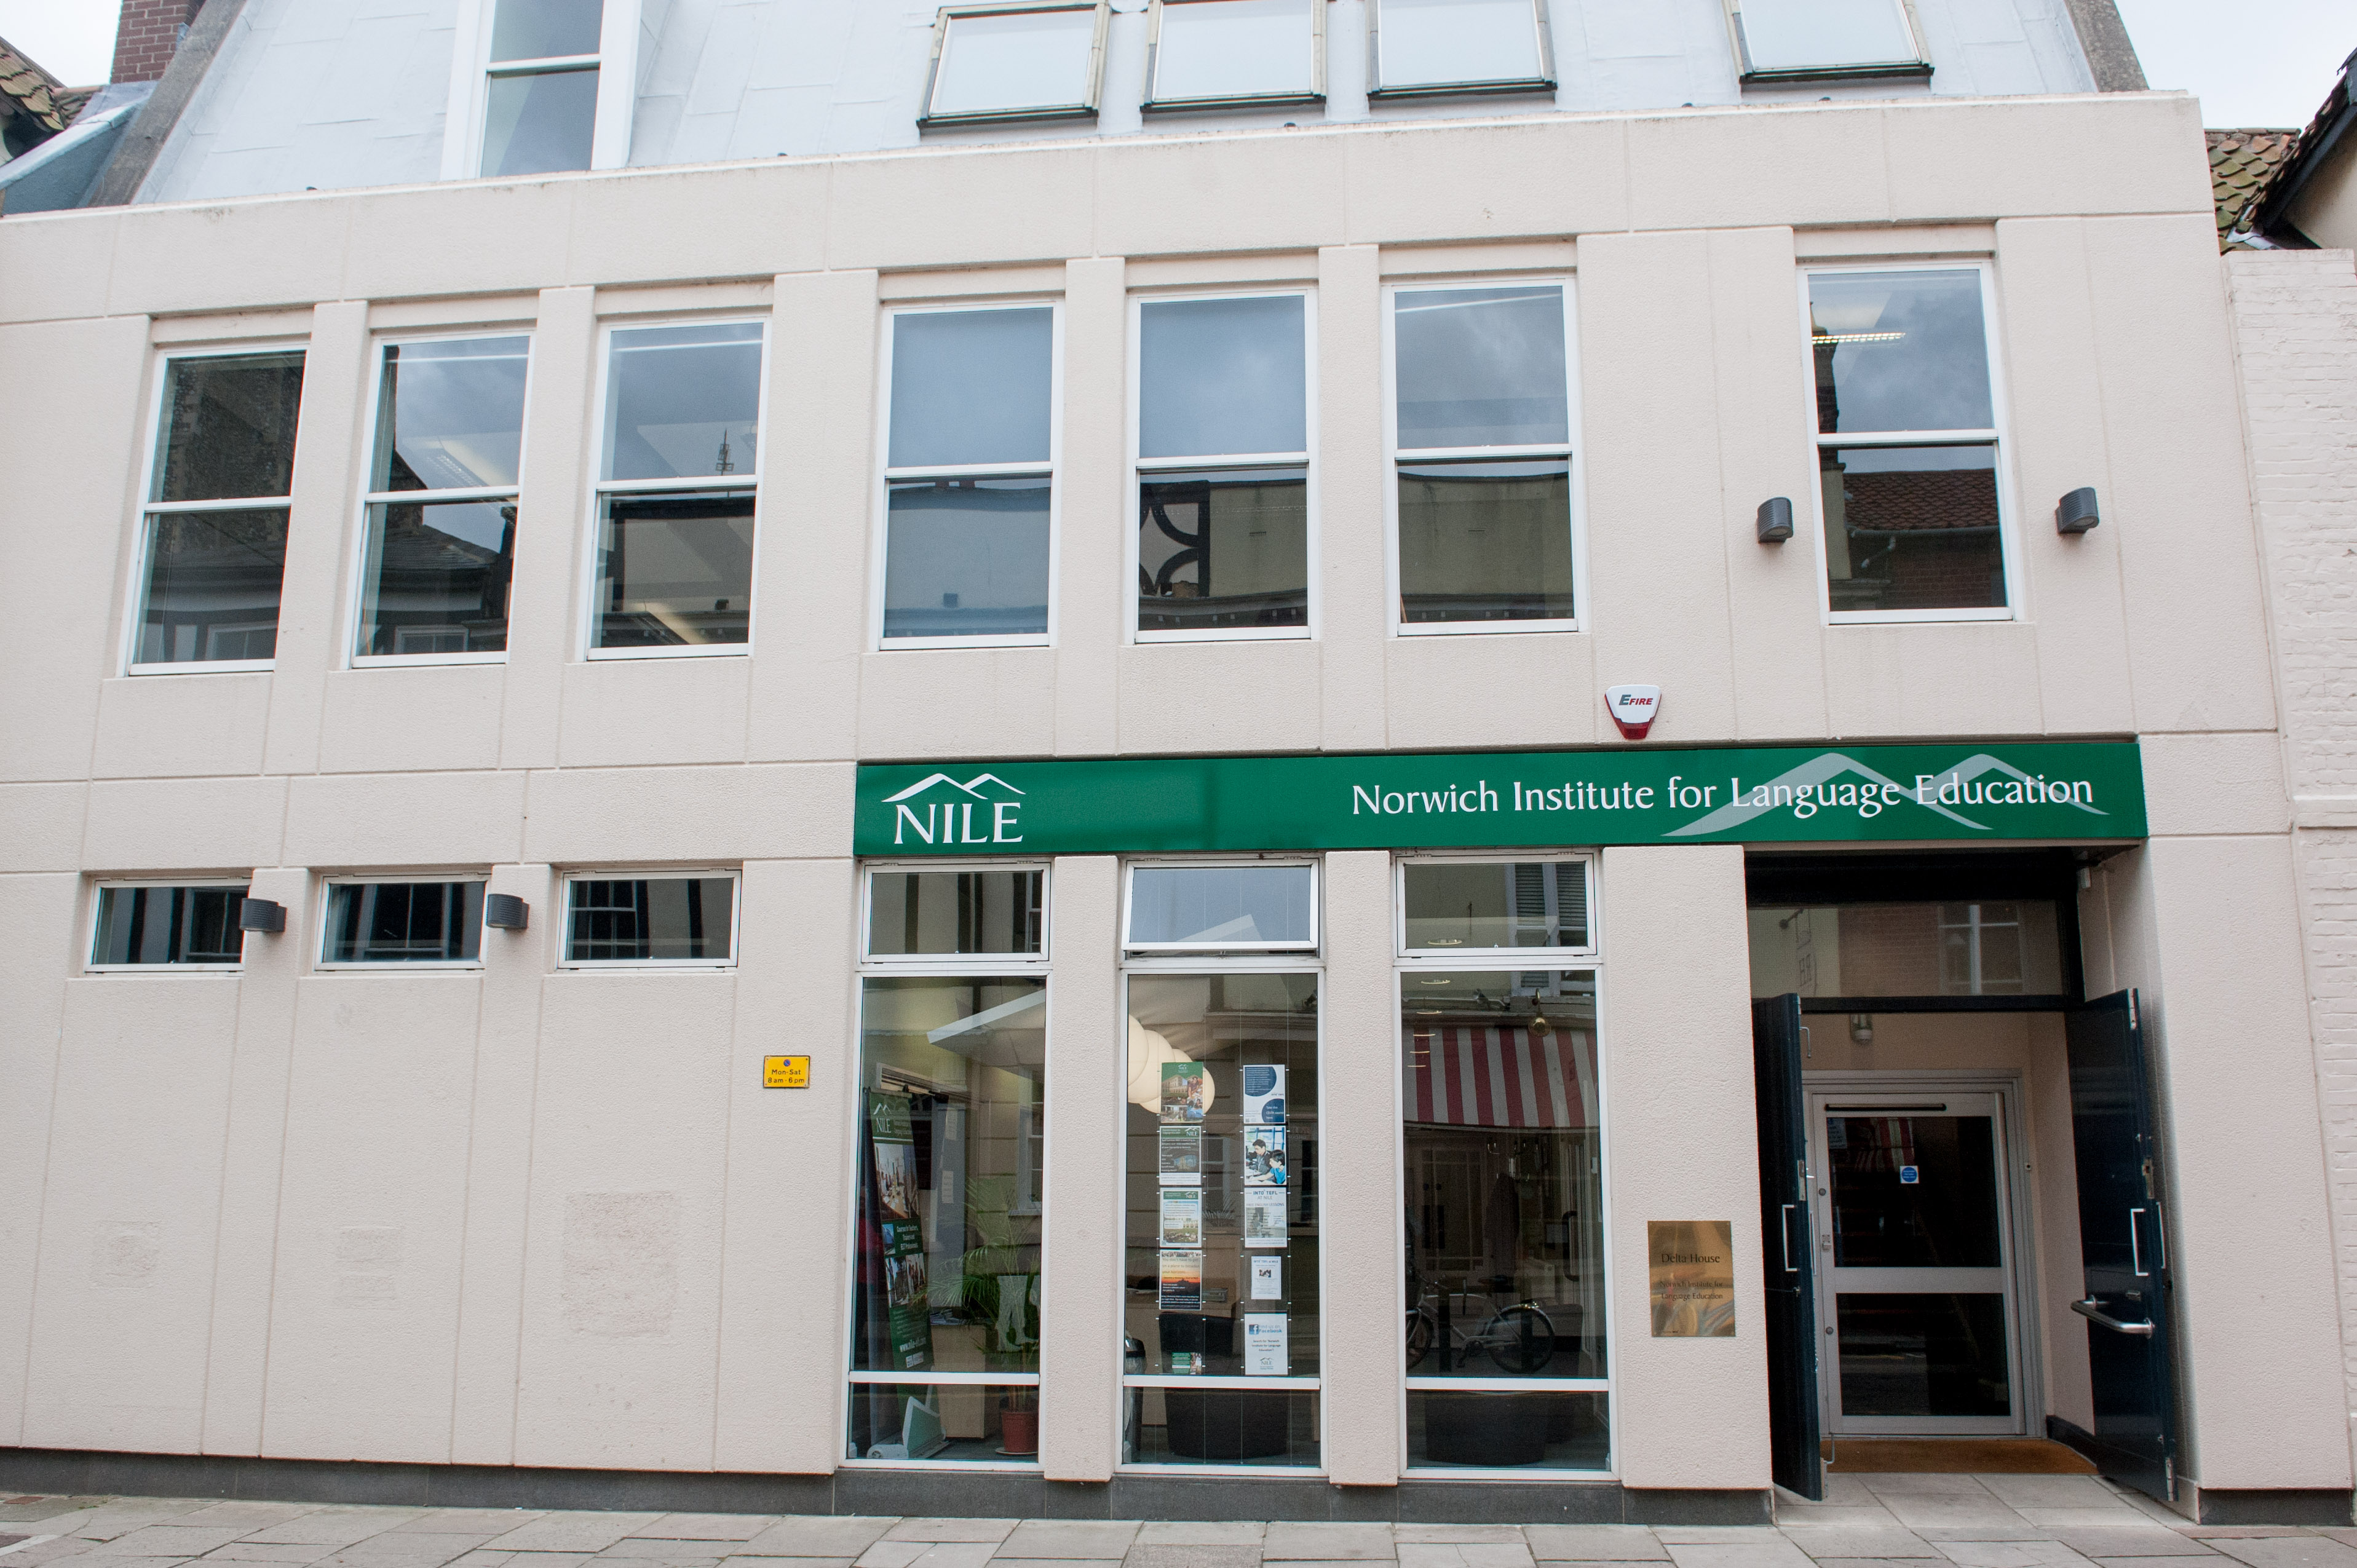 Norwich Institute for Language Education